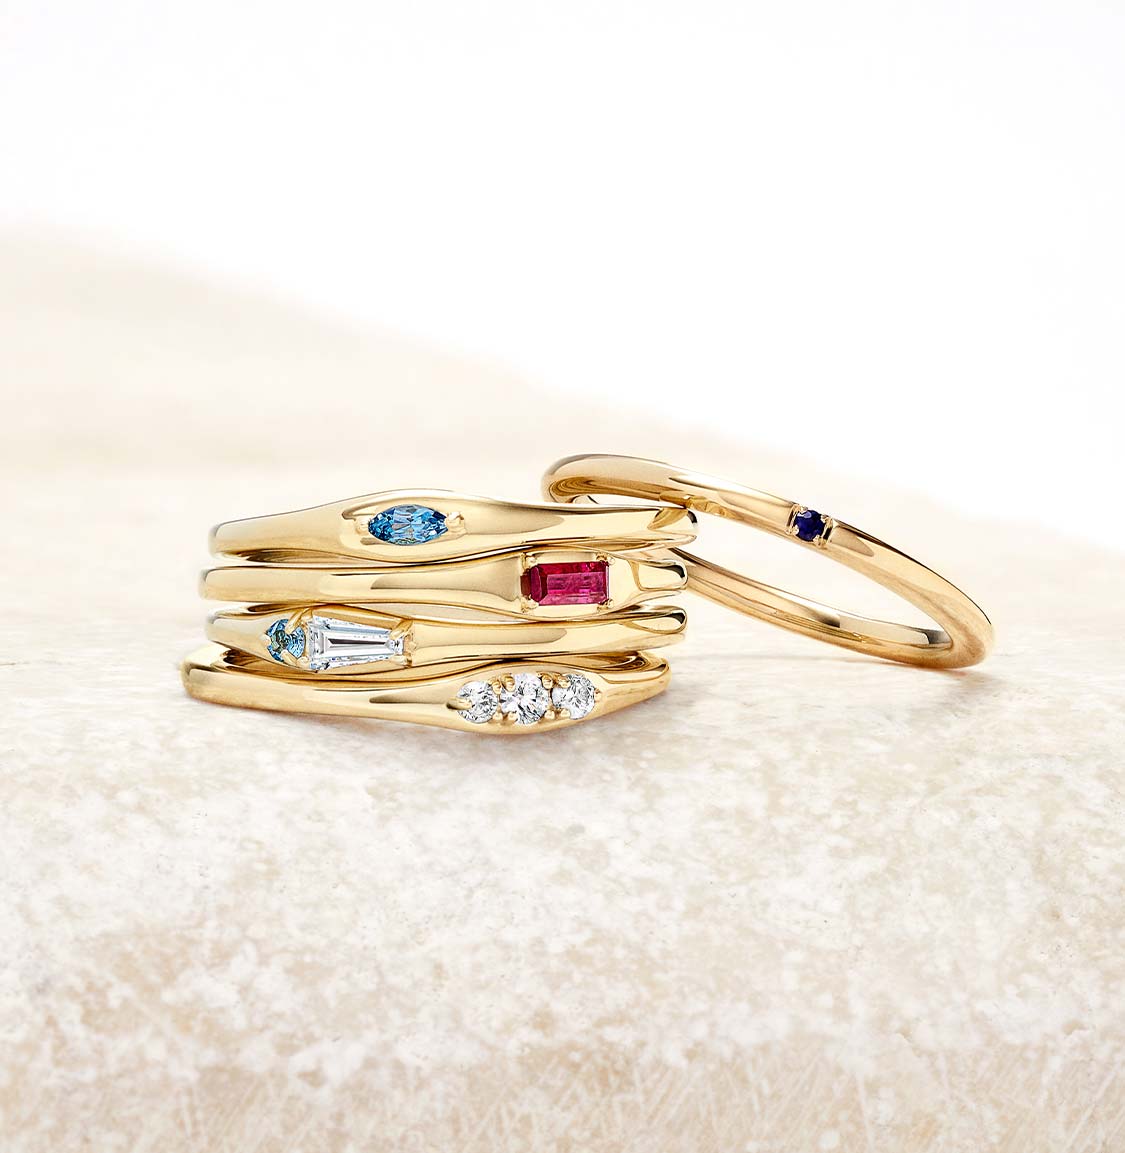 Gold stacked fashion rings.